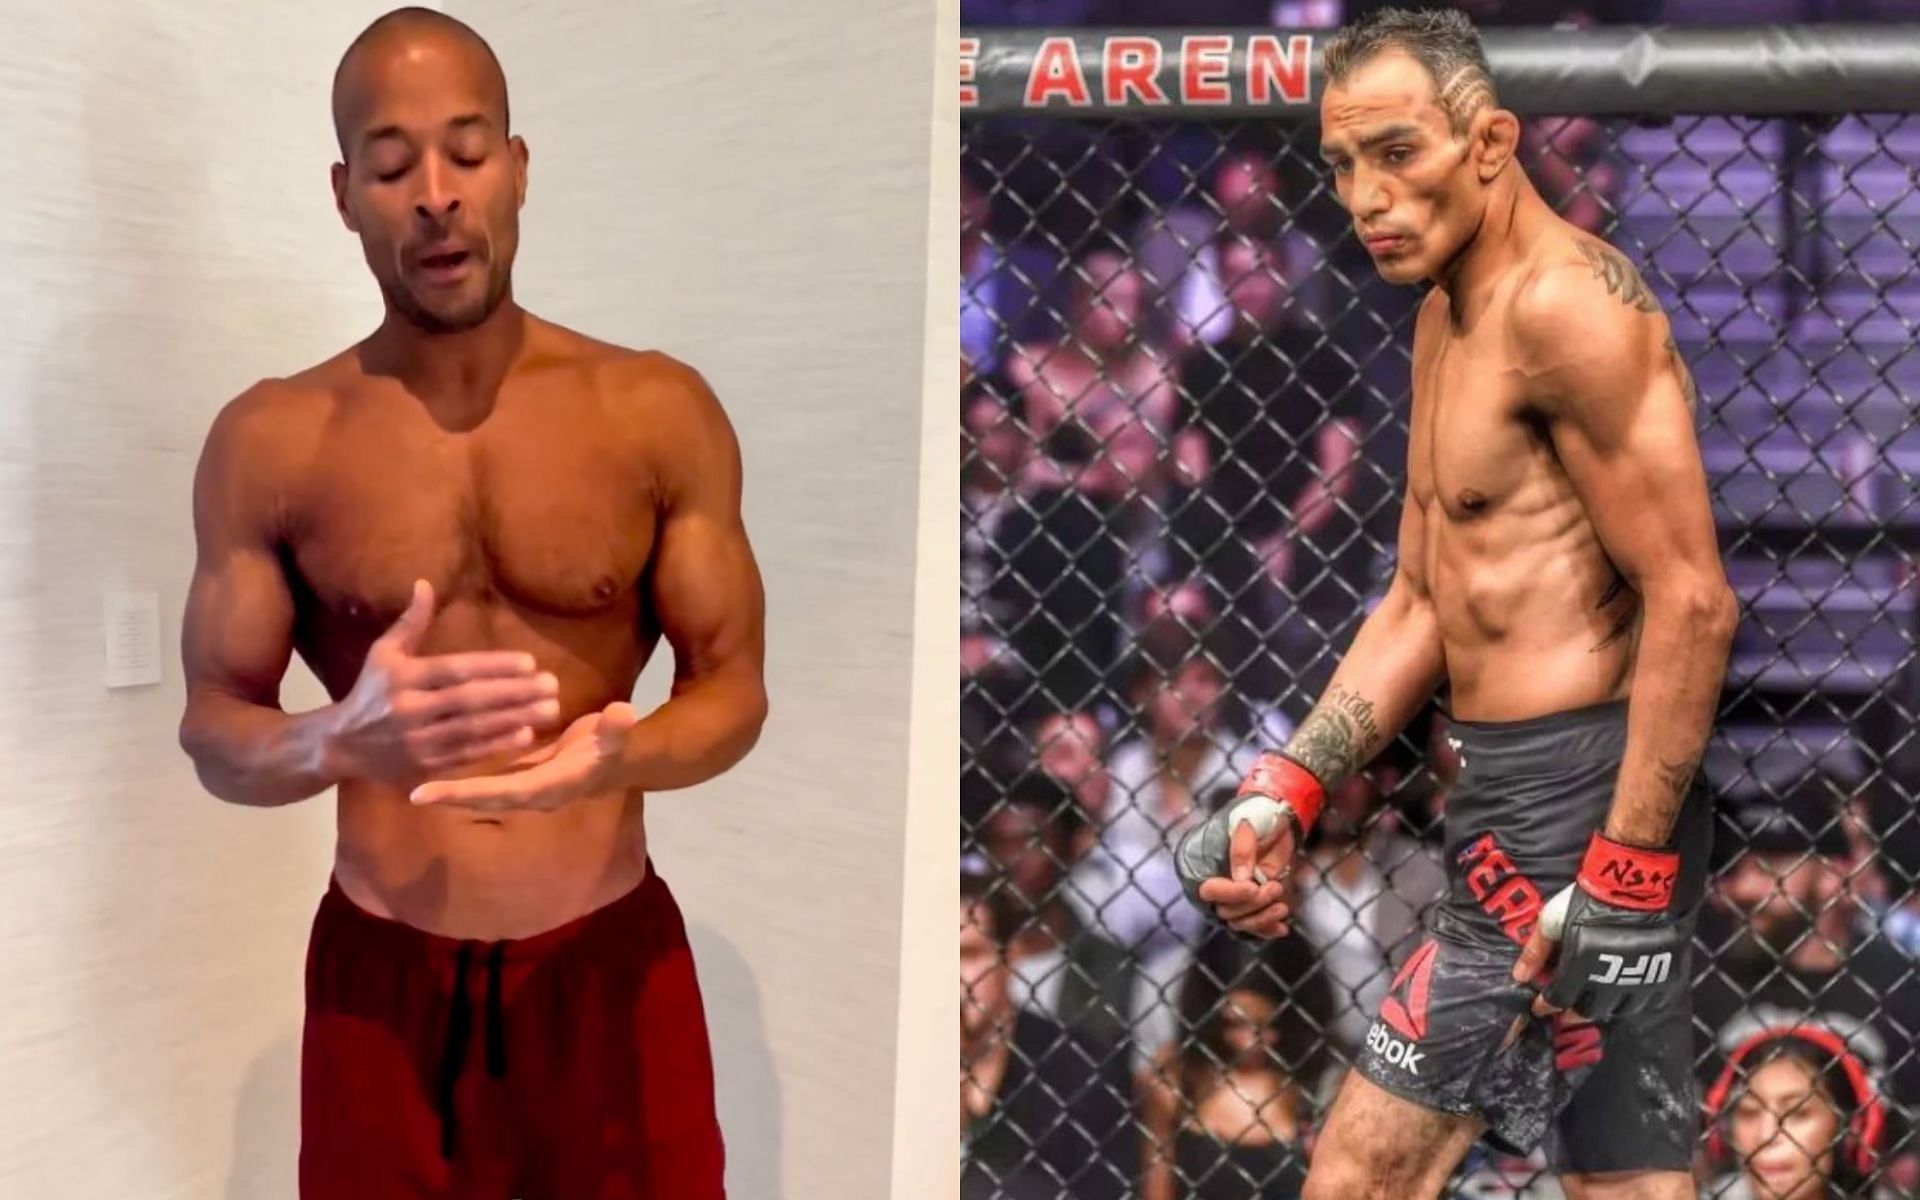 David Goggins: It will slow him down  - Former lightweight champion not a  fan of 'mentally strong' Tony Ferguson's workout with David Goggins